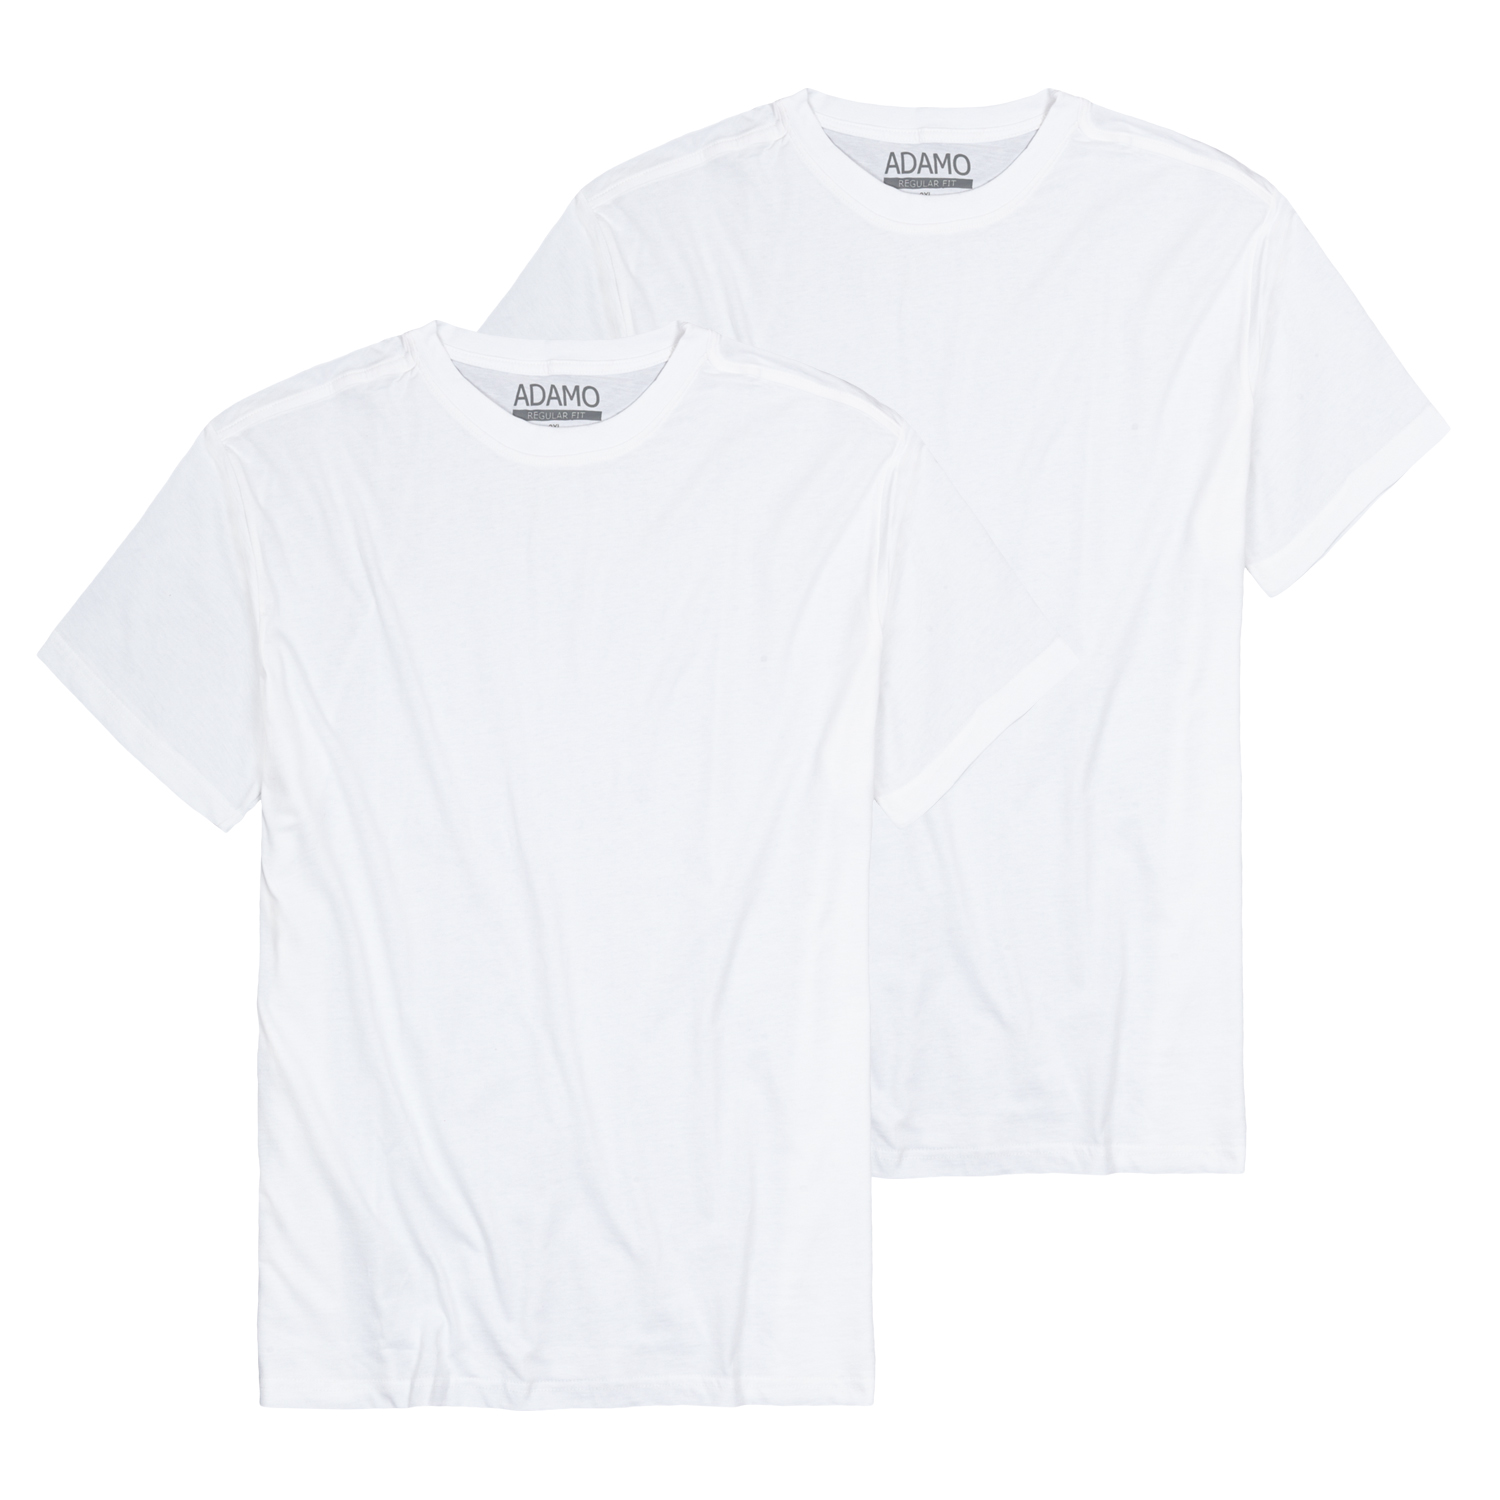 T-shirts in white series Kilian regular fit by Adamo for men up to oversize 10XL - double pack